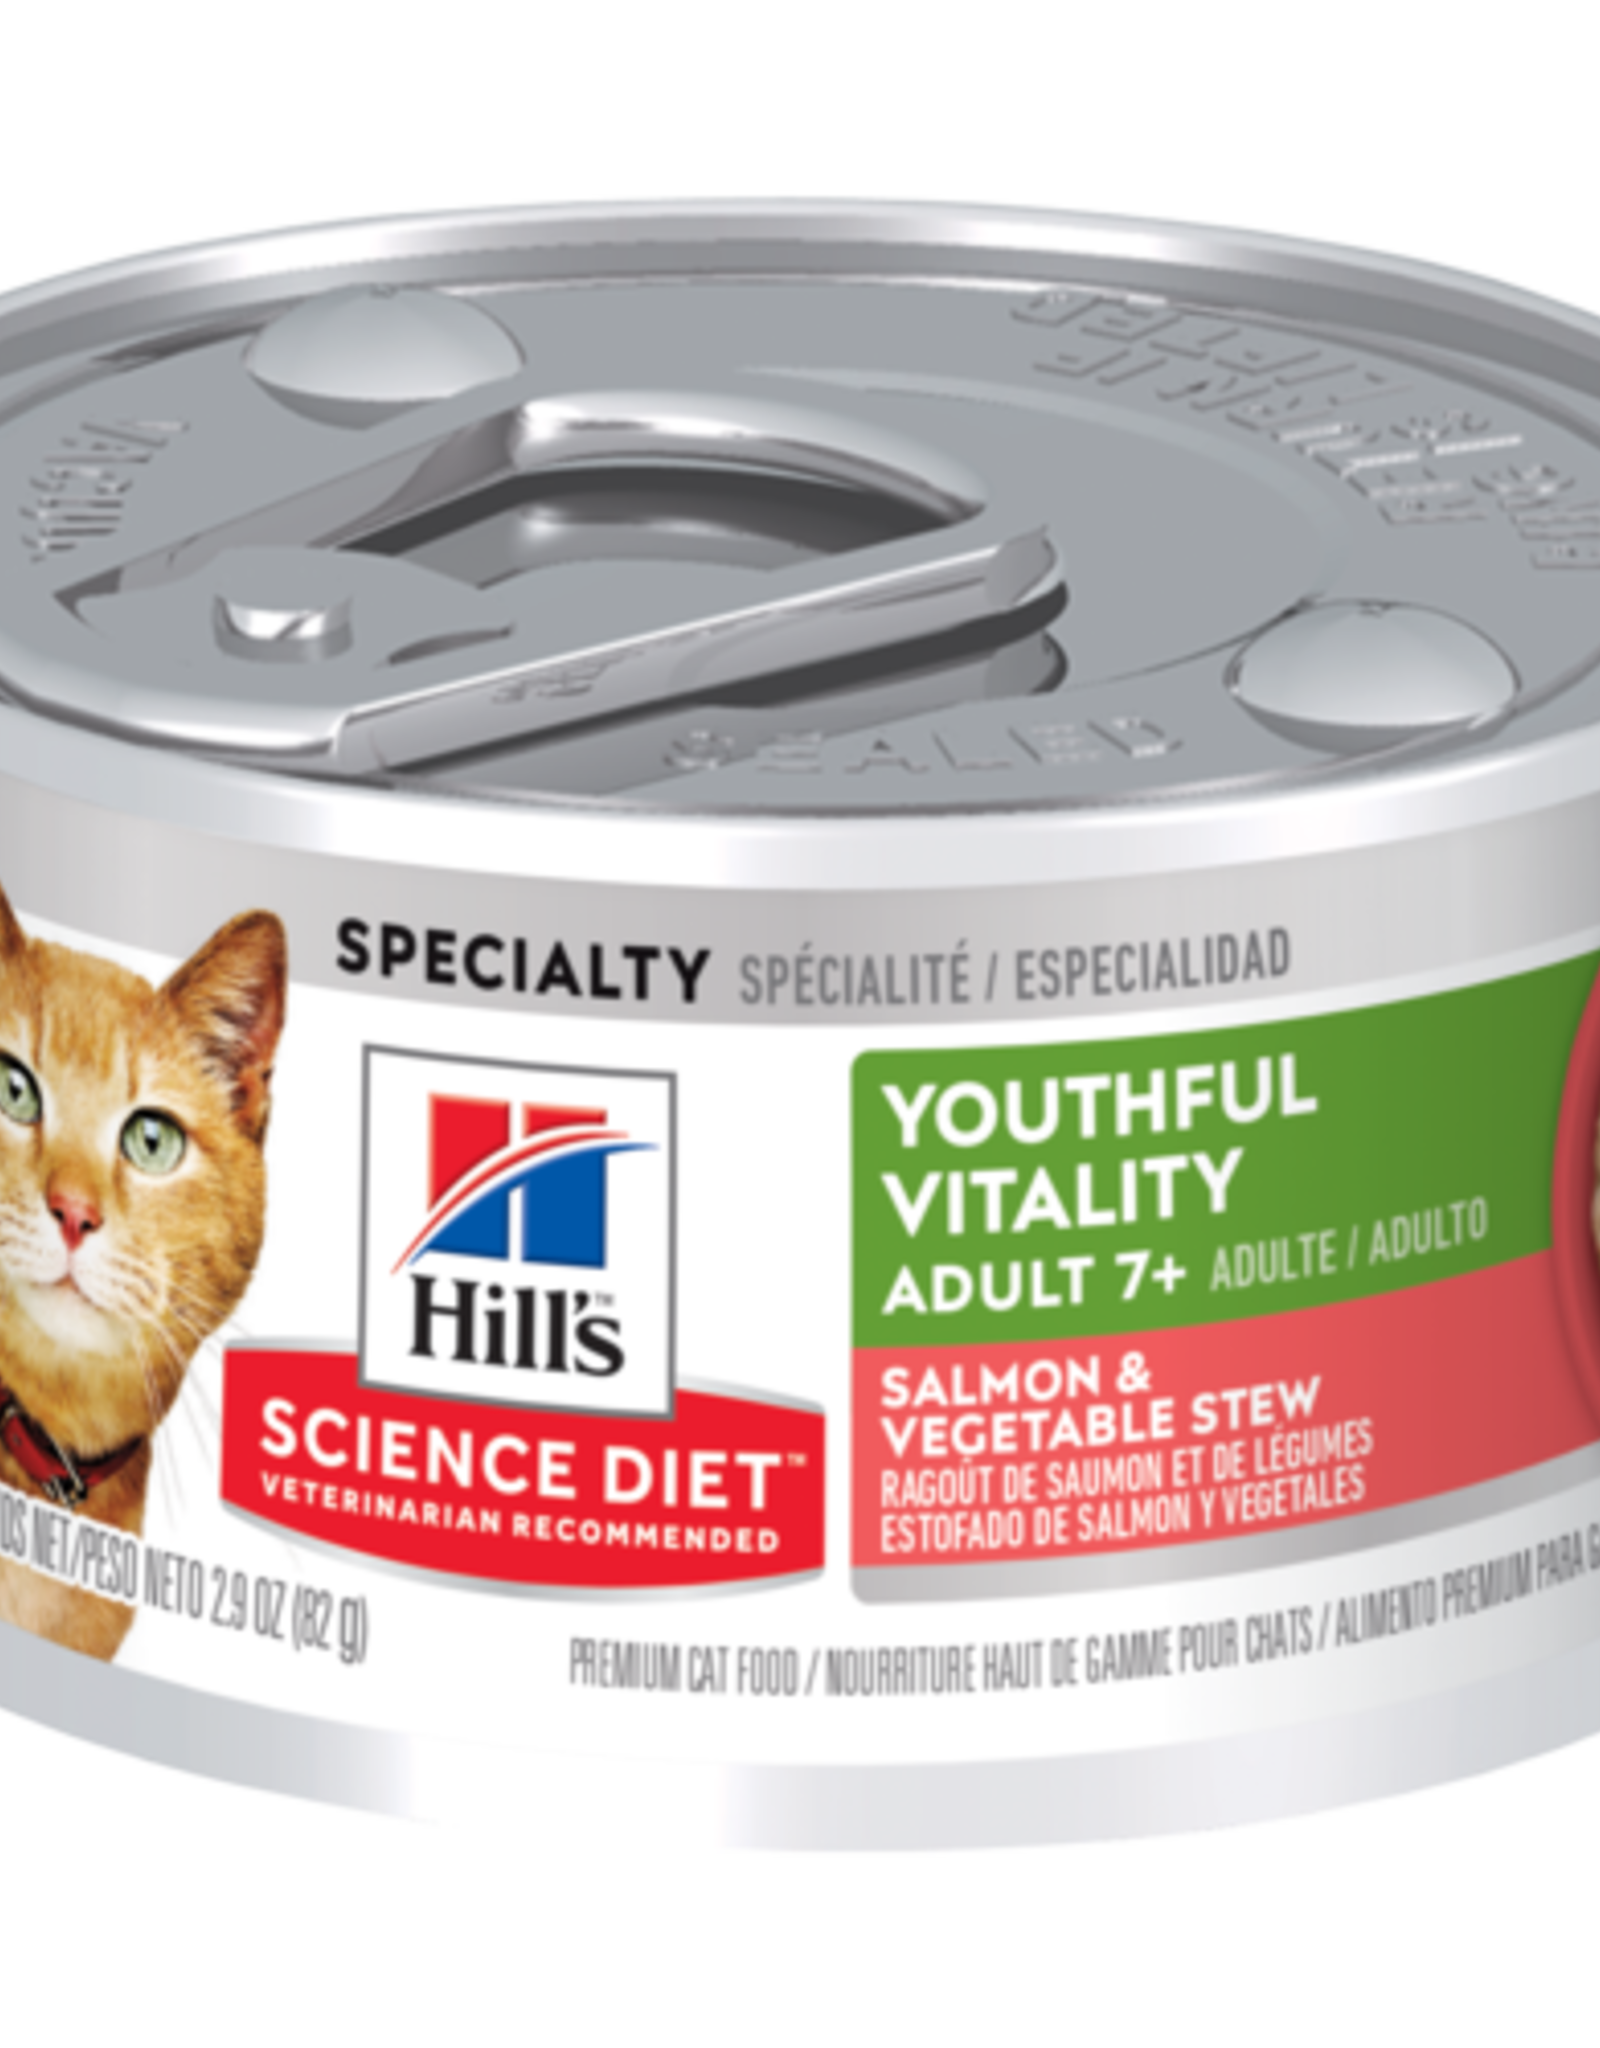 SCIENCE DIET HILL'S SCIENCE DIET CAT ADULT 7+ YOUTHFUL VITALITY SALMON & VEGETABLE STEW 2.9OZ CASE OF 24